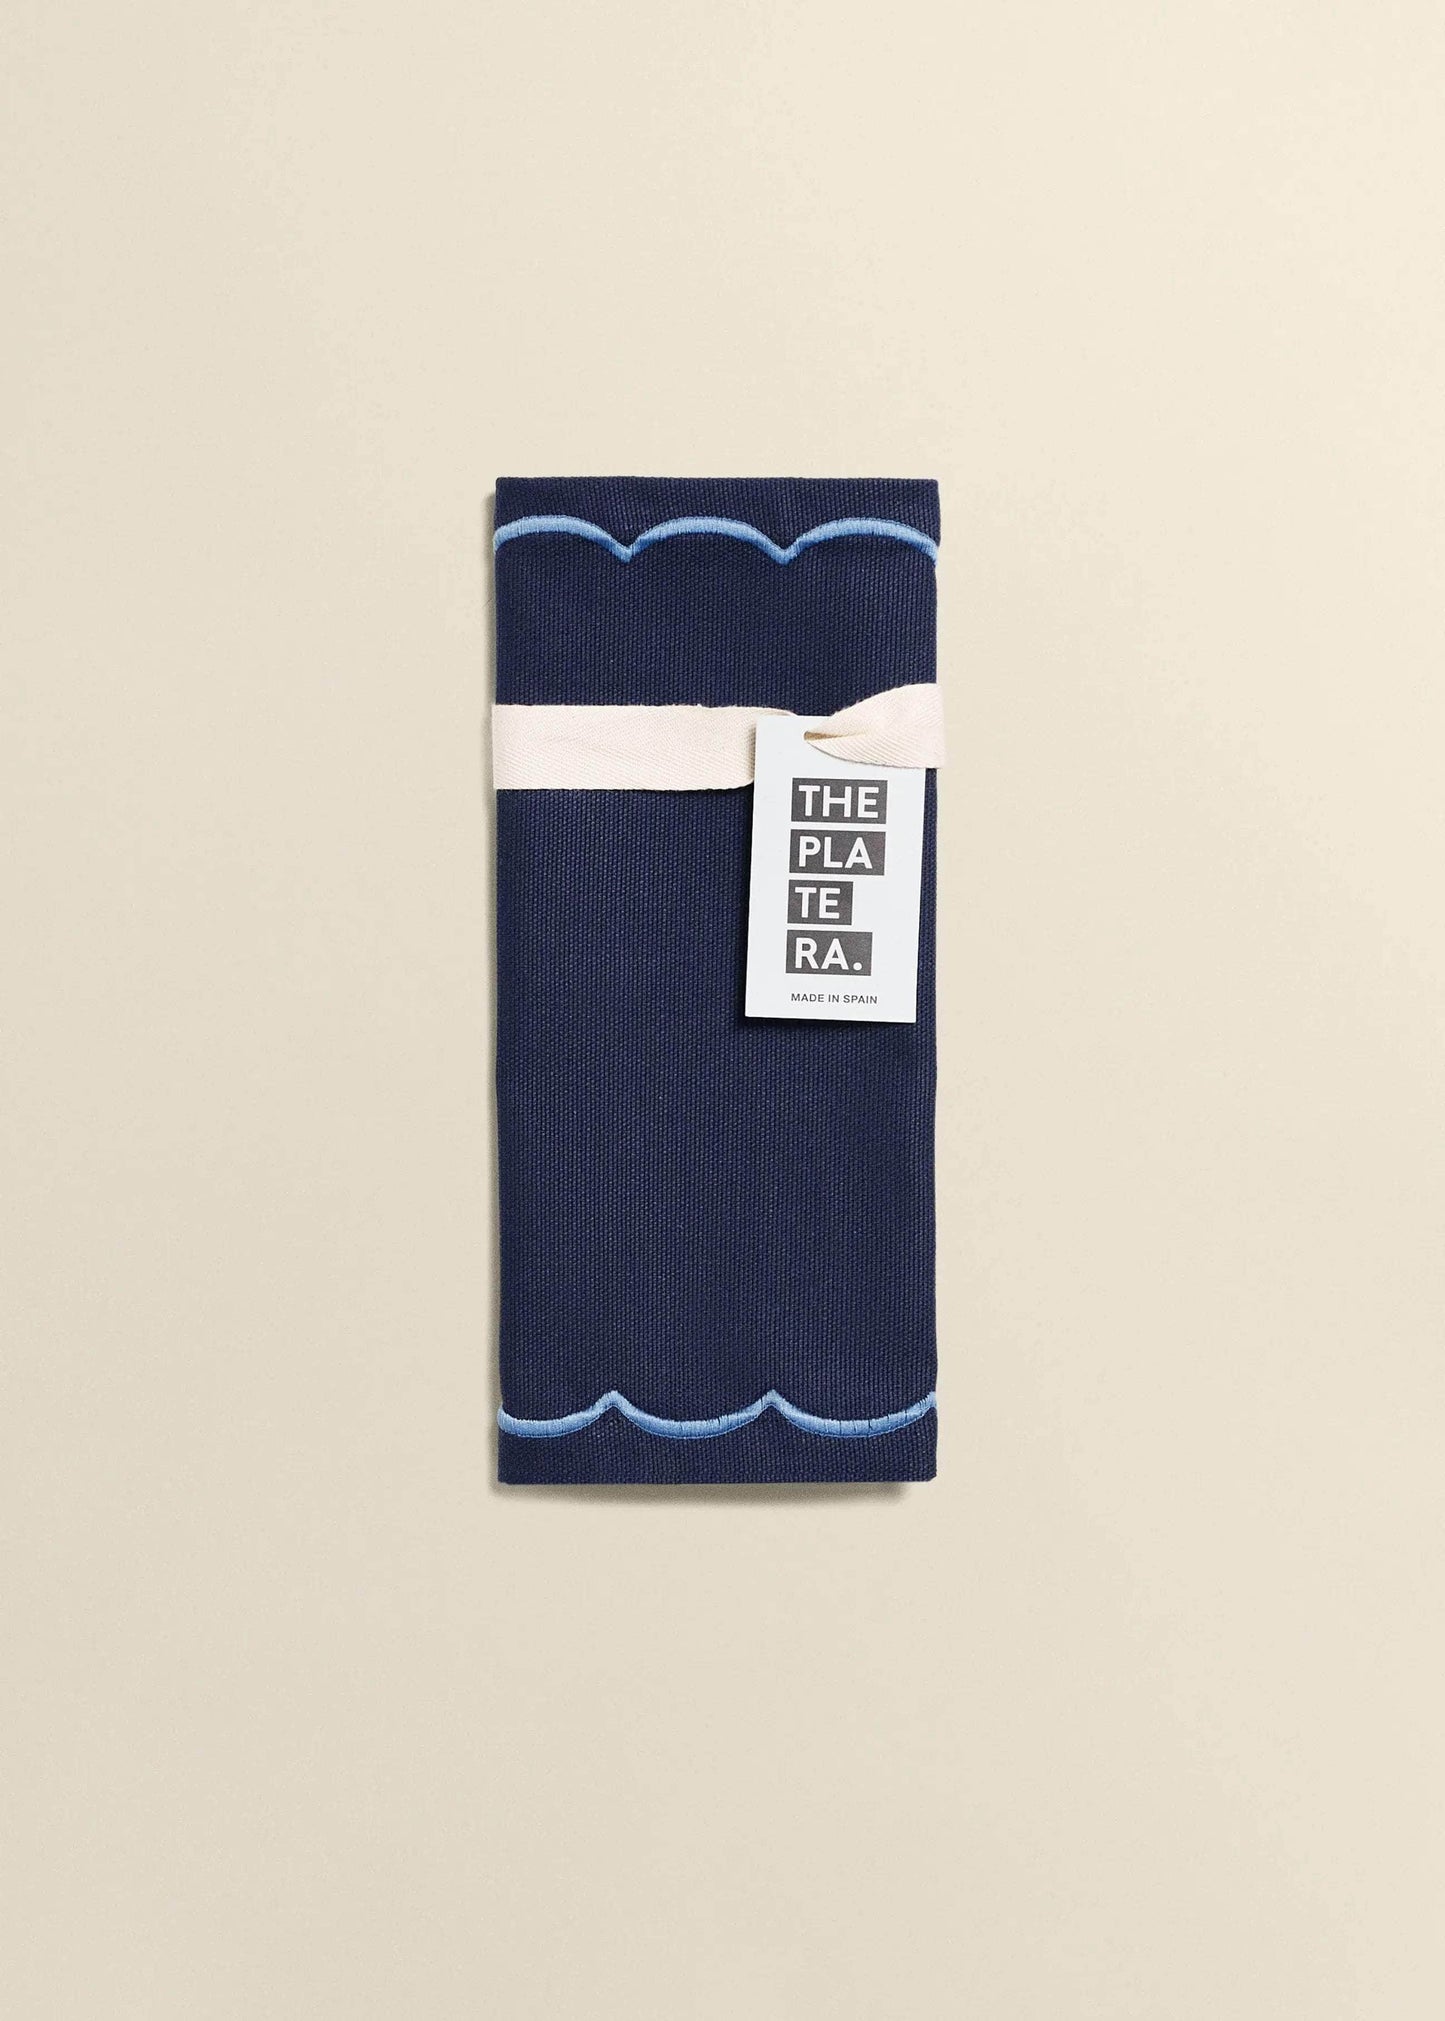 Dark Blue Wave Embroidered Placemat